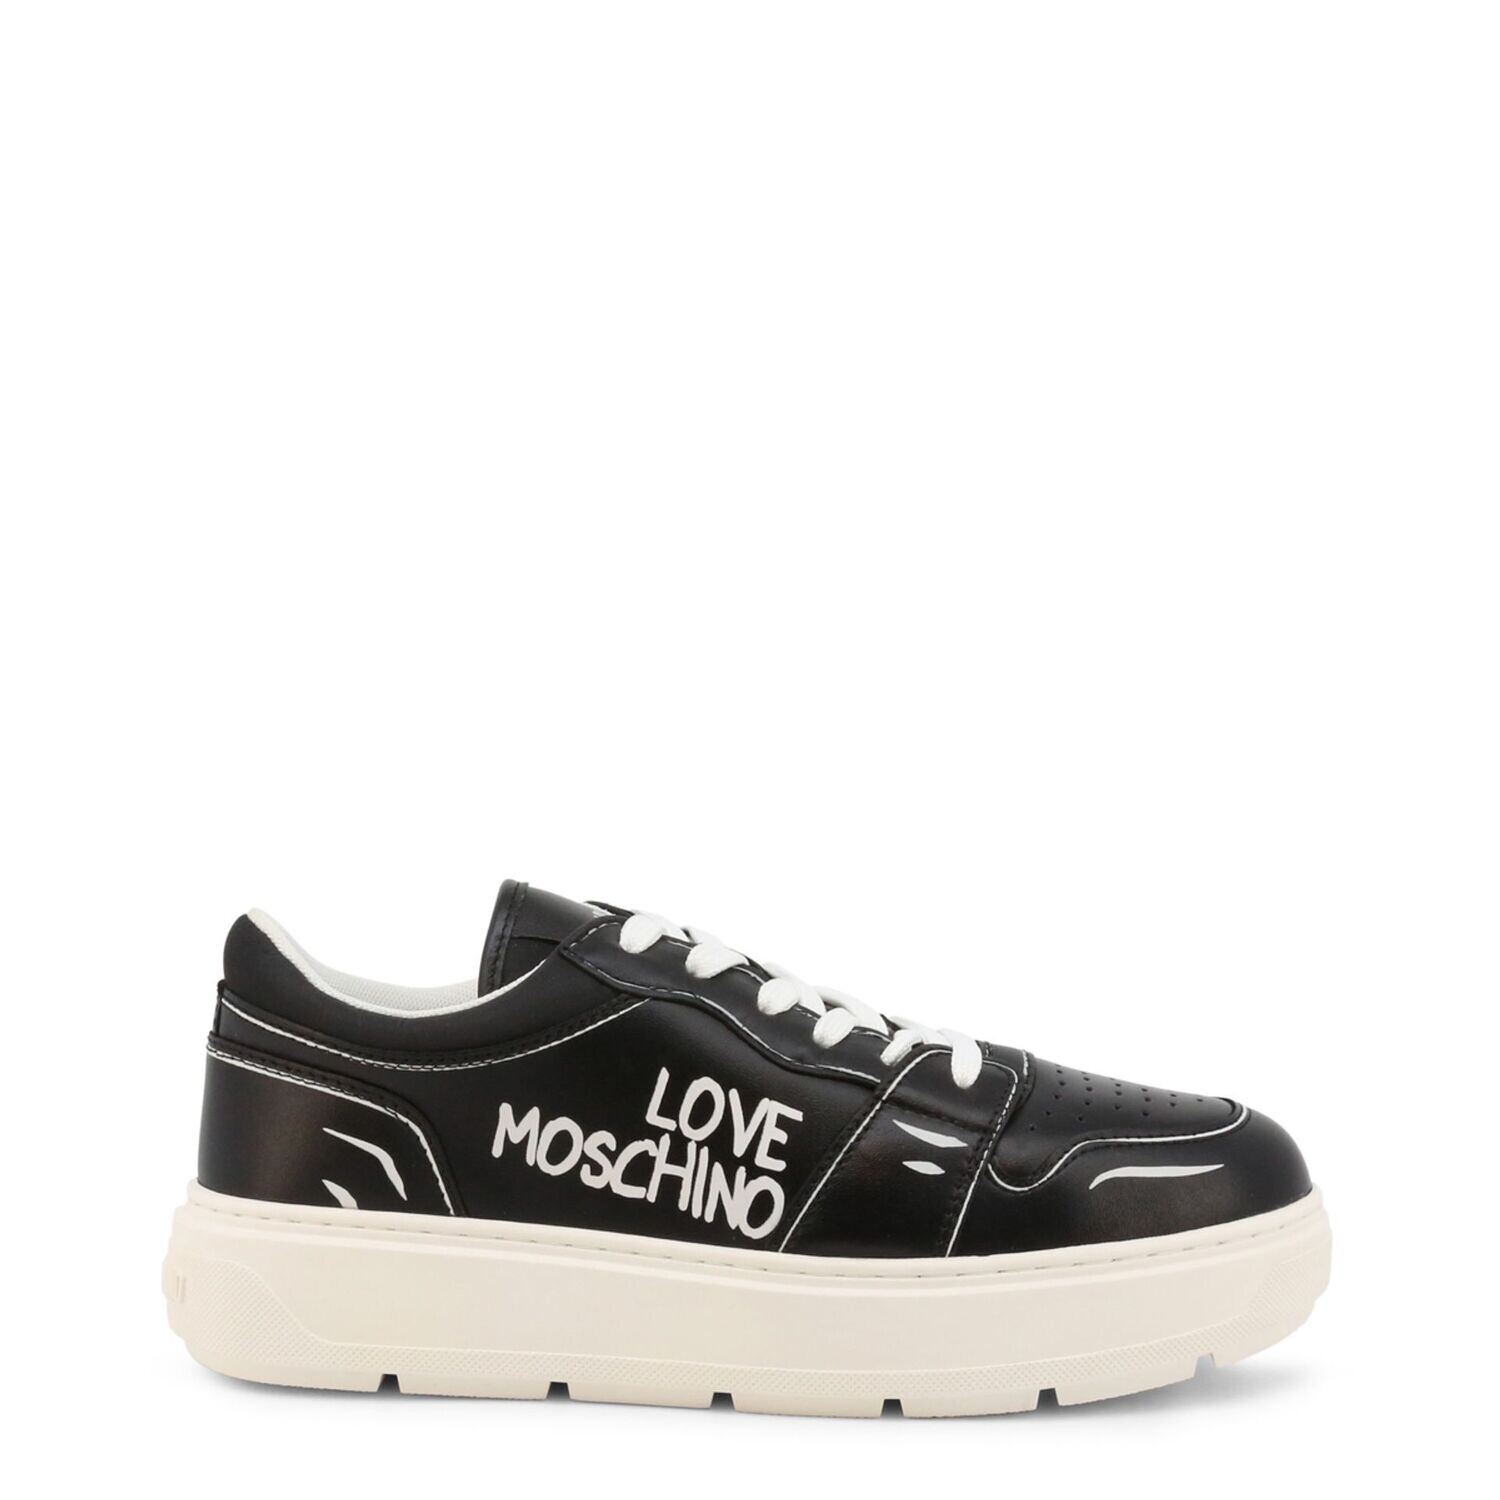 Love Moschino Black Leather Trainers